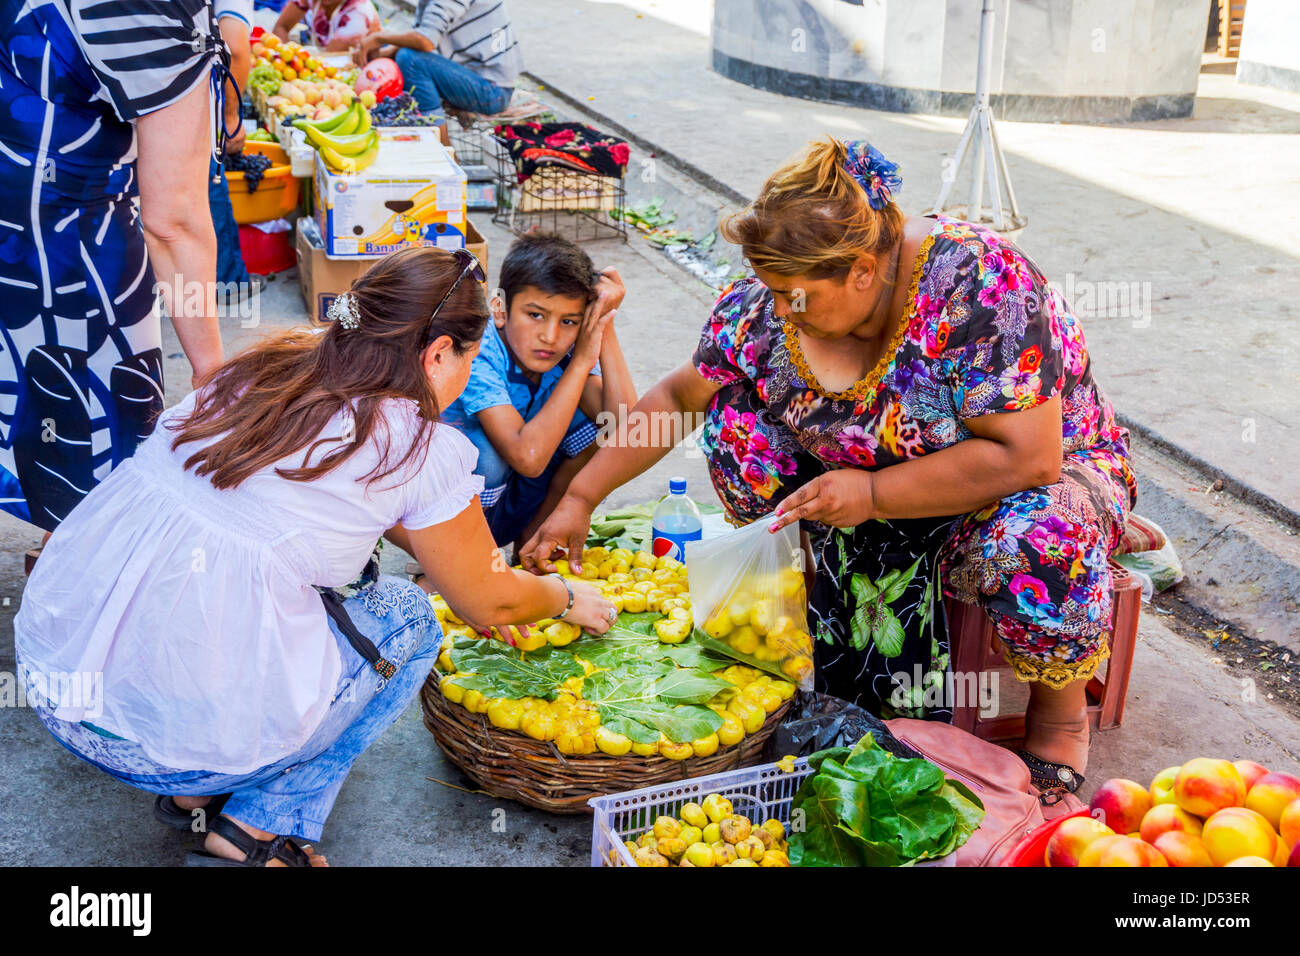 SAMARKAND, UZBEKISTAN - AUGUST 28: Woman picking ripe yellow figs out of the basket at Siab bazaar, local market in Samarkand. August 2016 Stock Photo